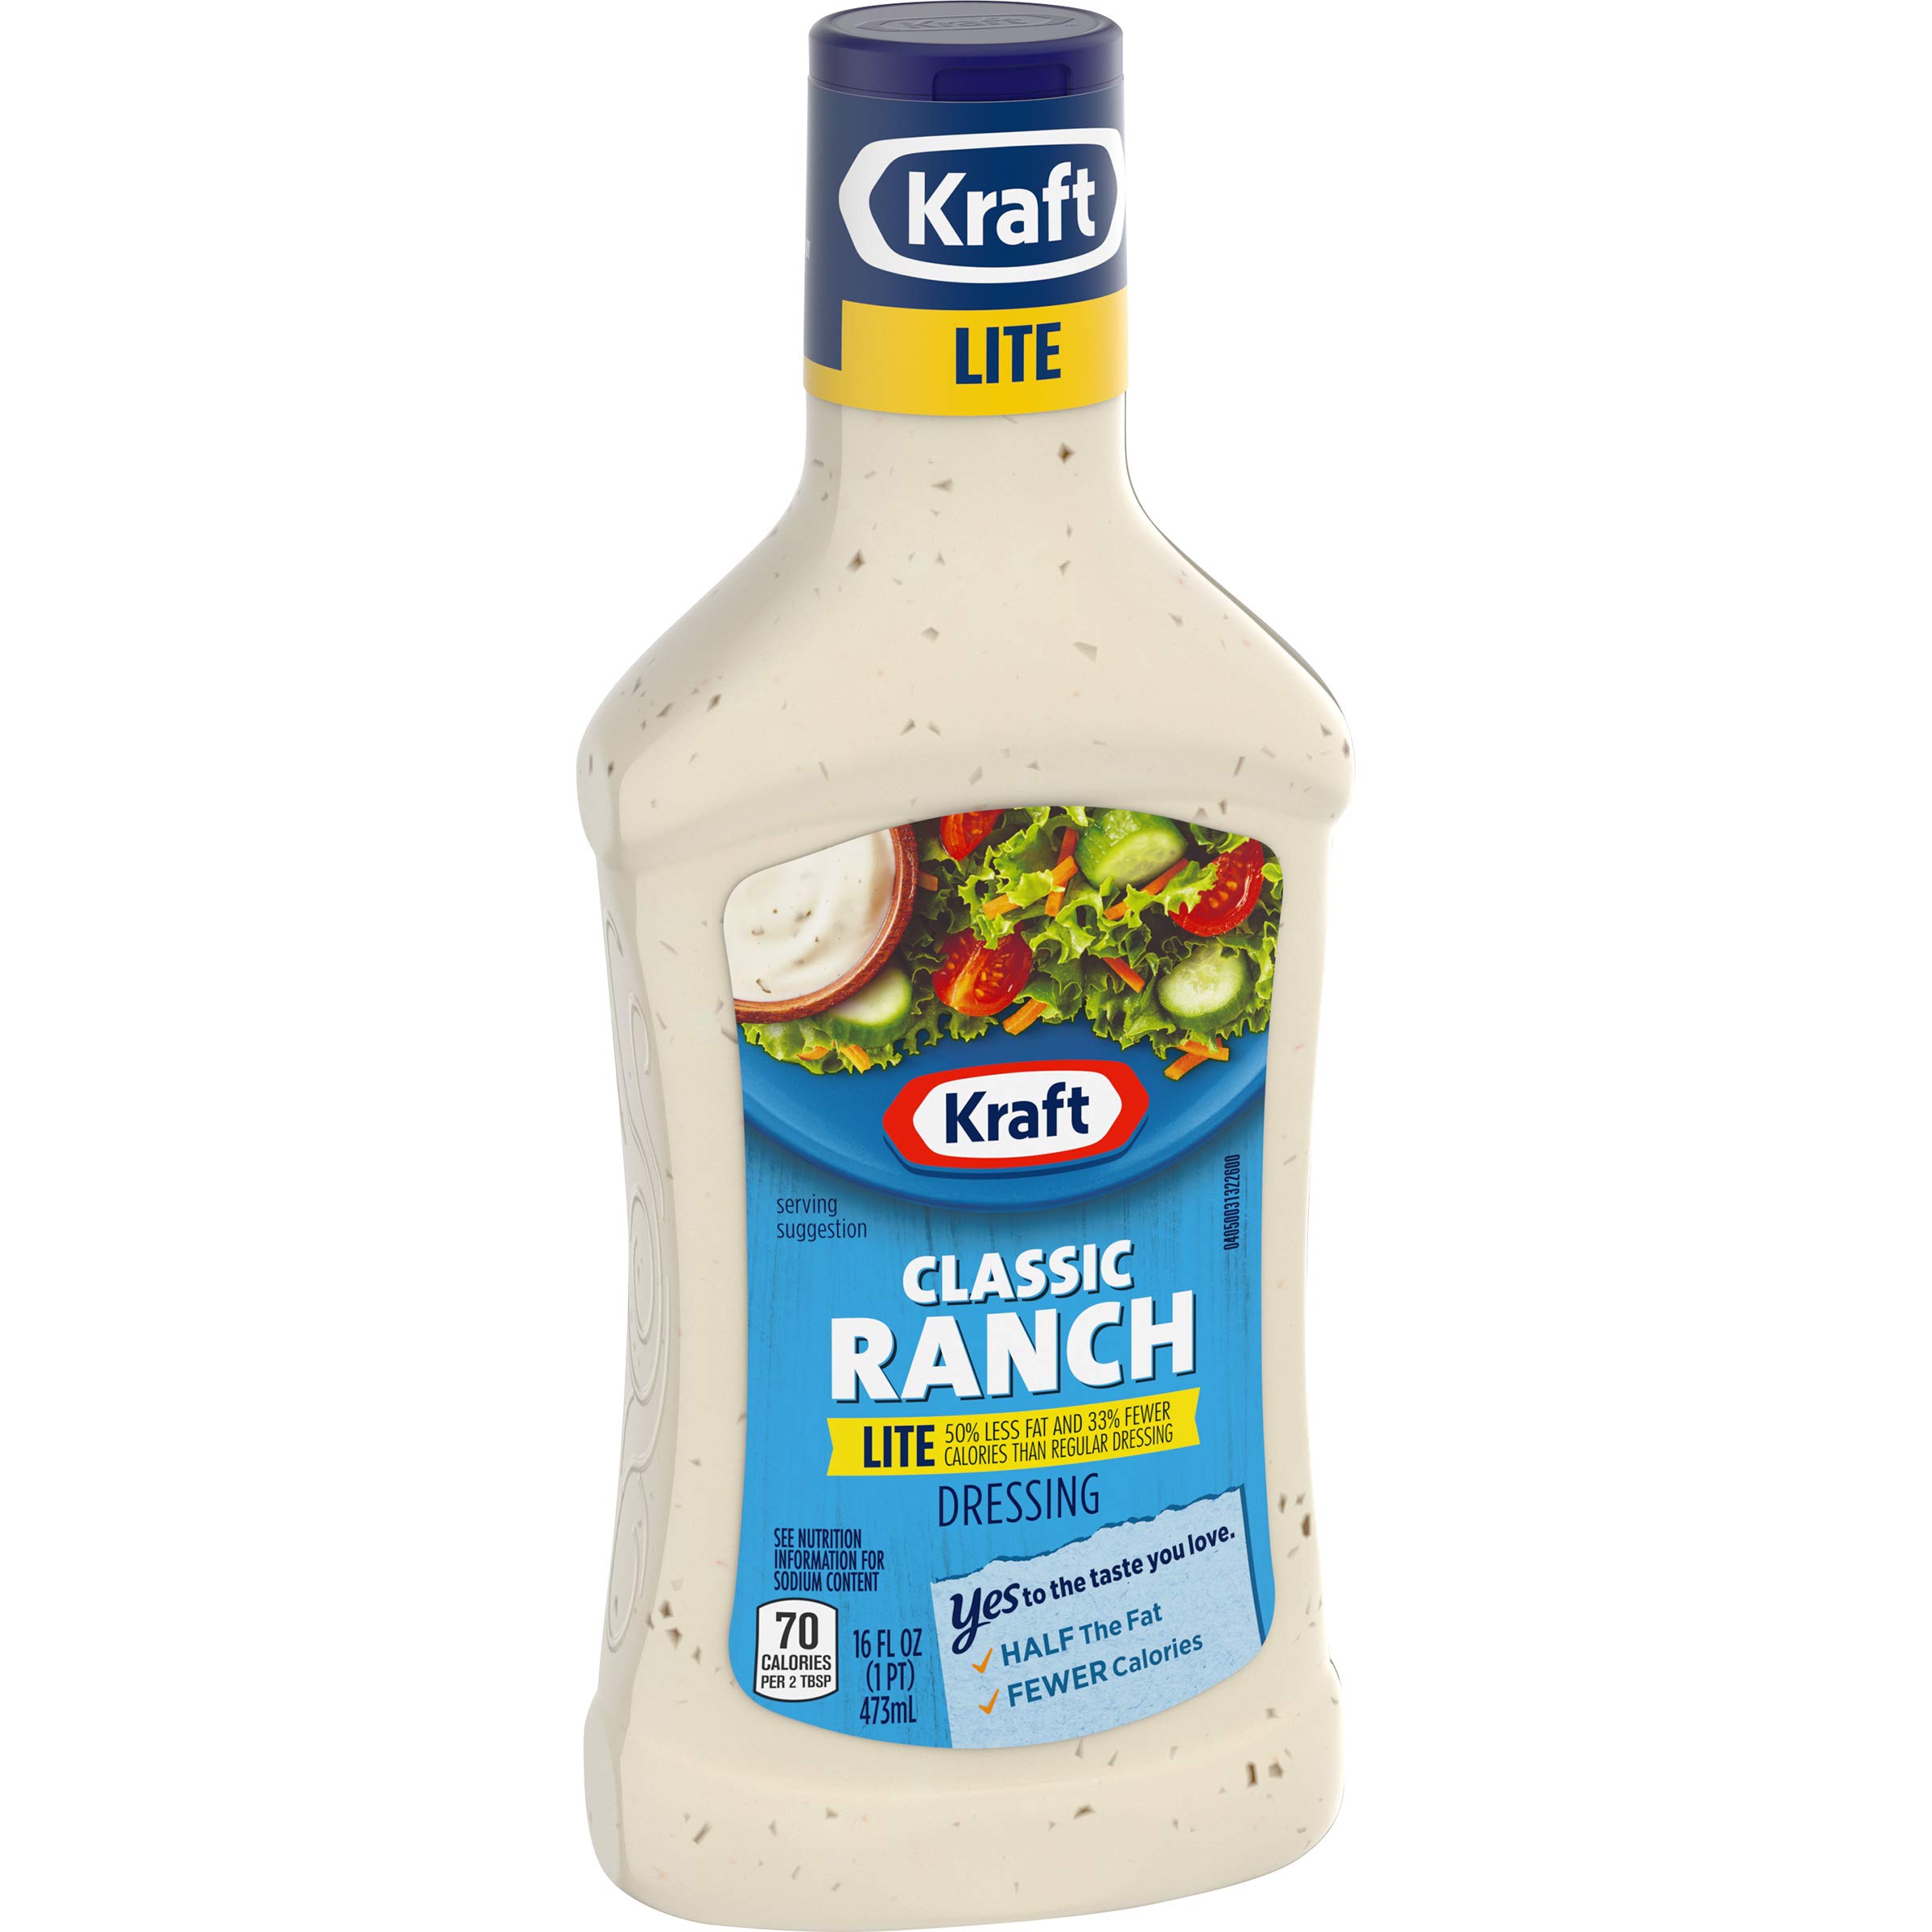 Kraft Classic Ranch Lite Salad Dressing,16 oz , $2.11 after 15 % S&S, $2.36 w/5% S&S at Amazon